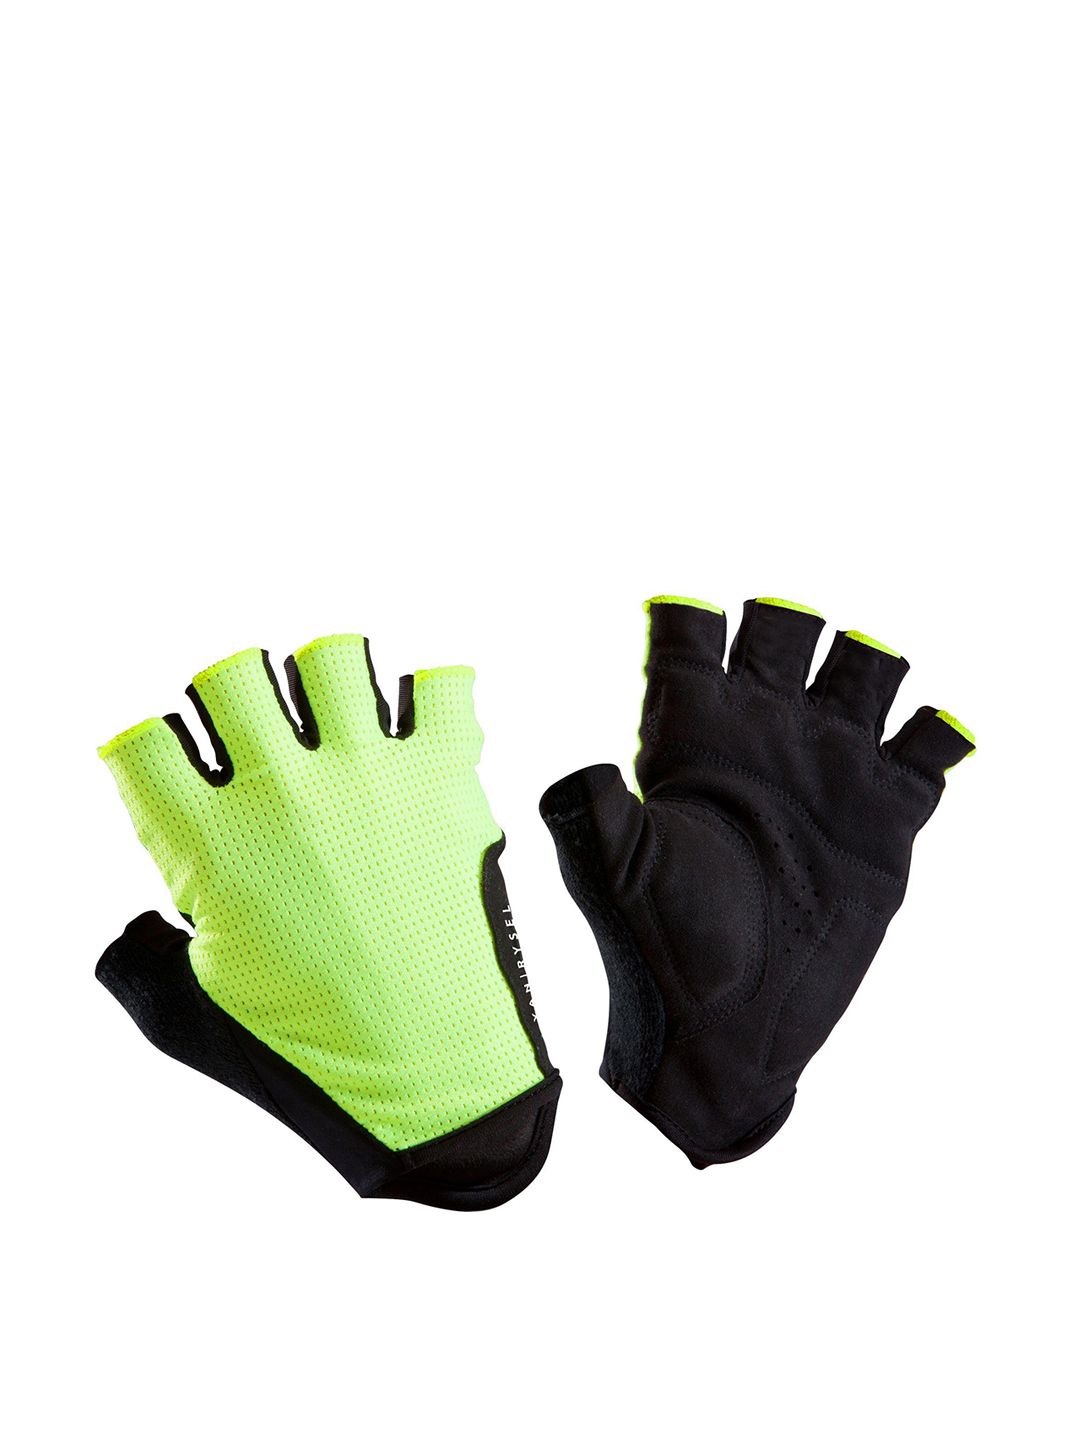 TRIBAN By Decathlon Adults Fluorescent Green & Black Solid Cycling Gloves Price in India